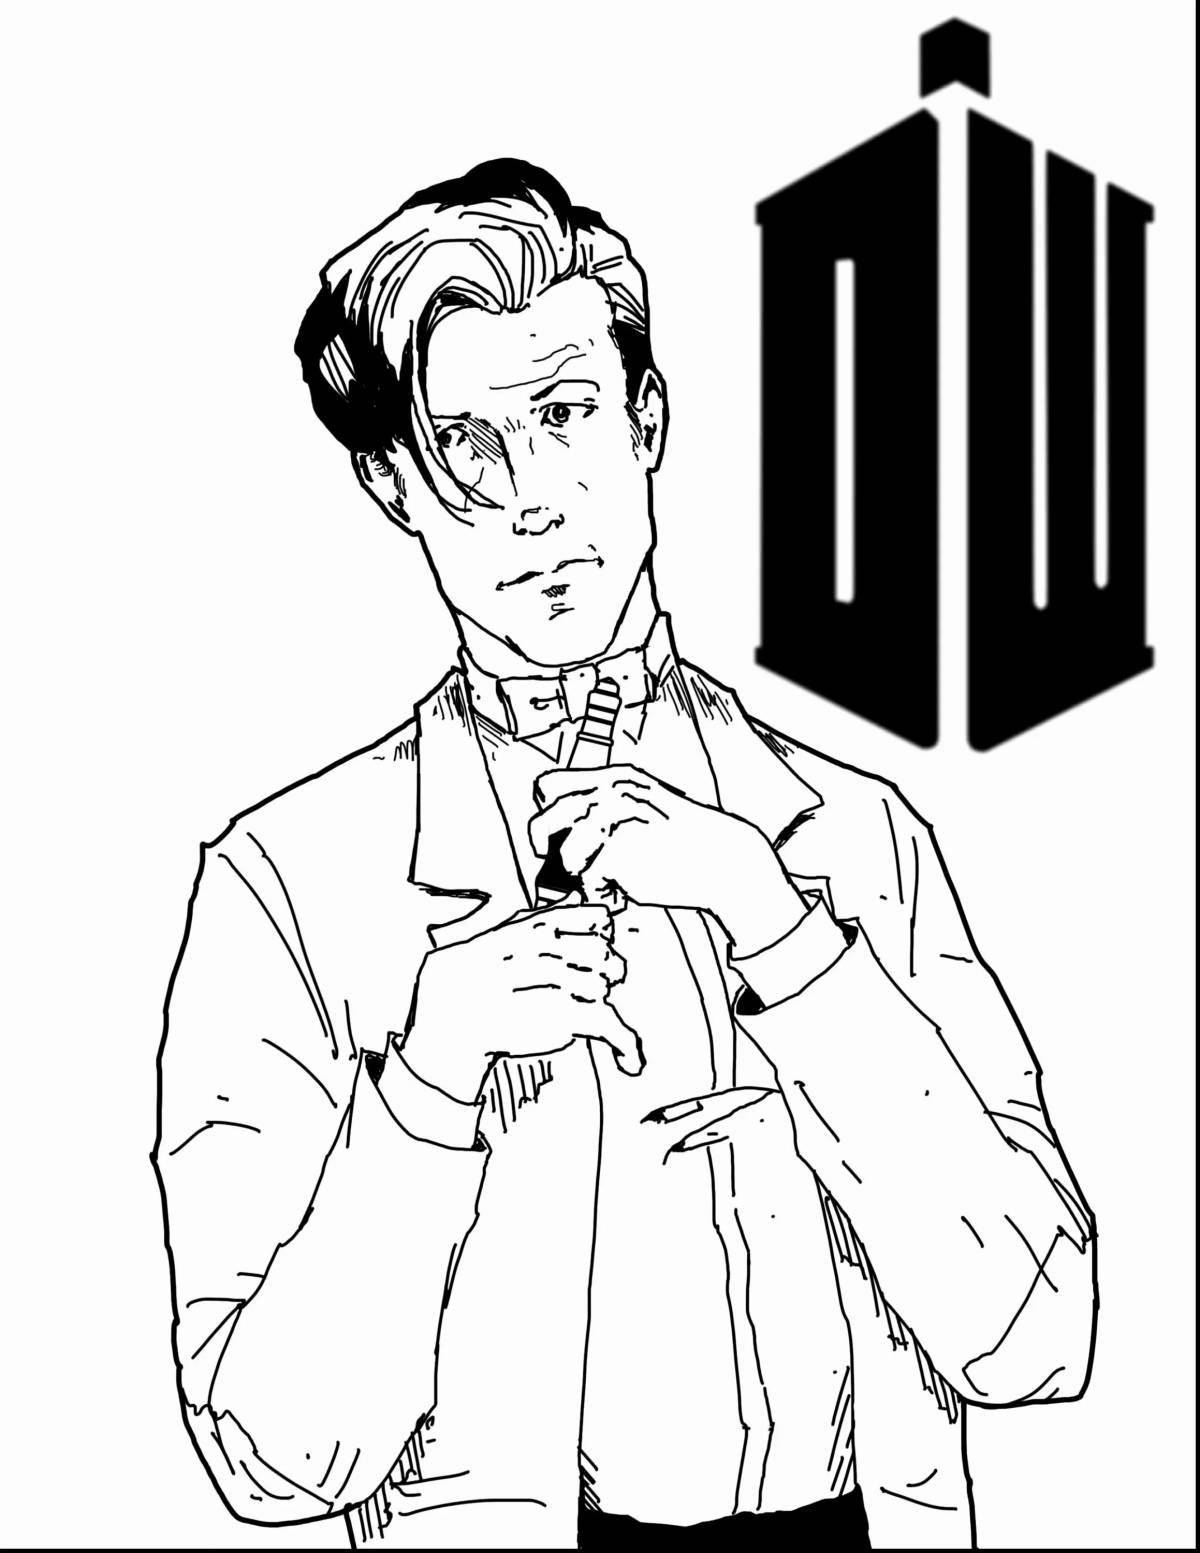 Charming doctor who coloring book